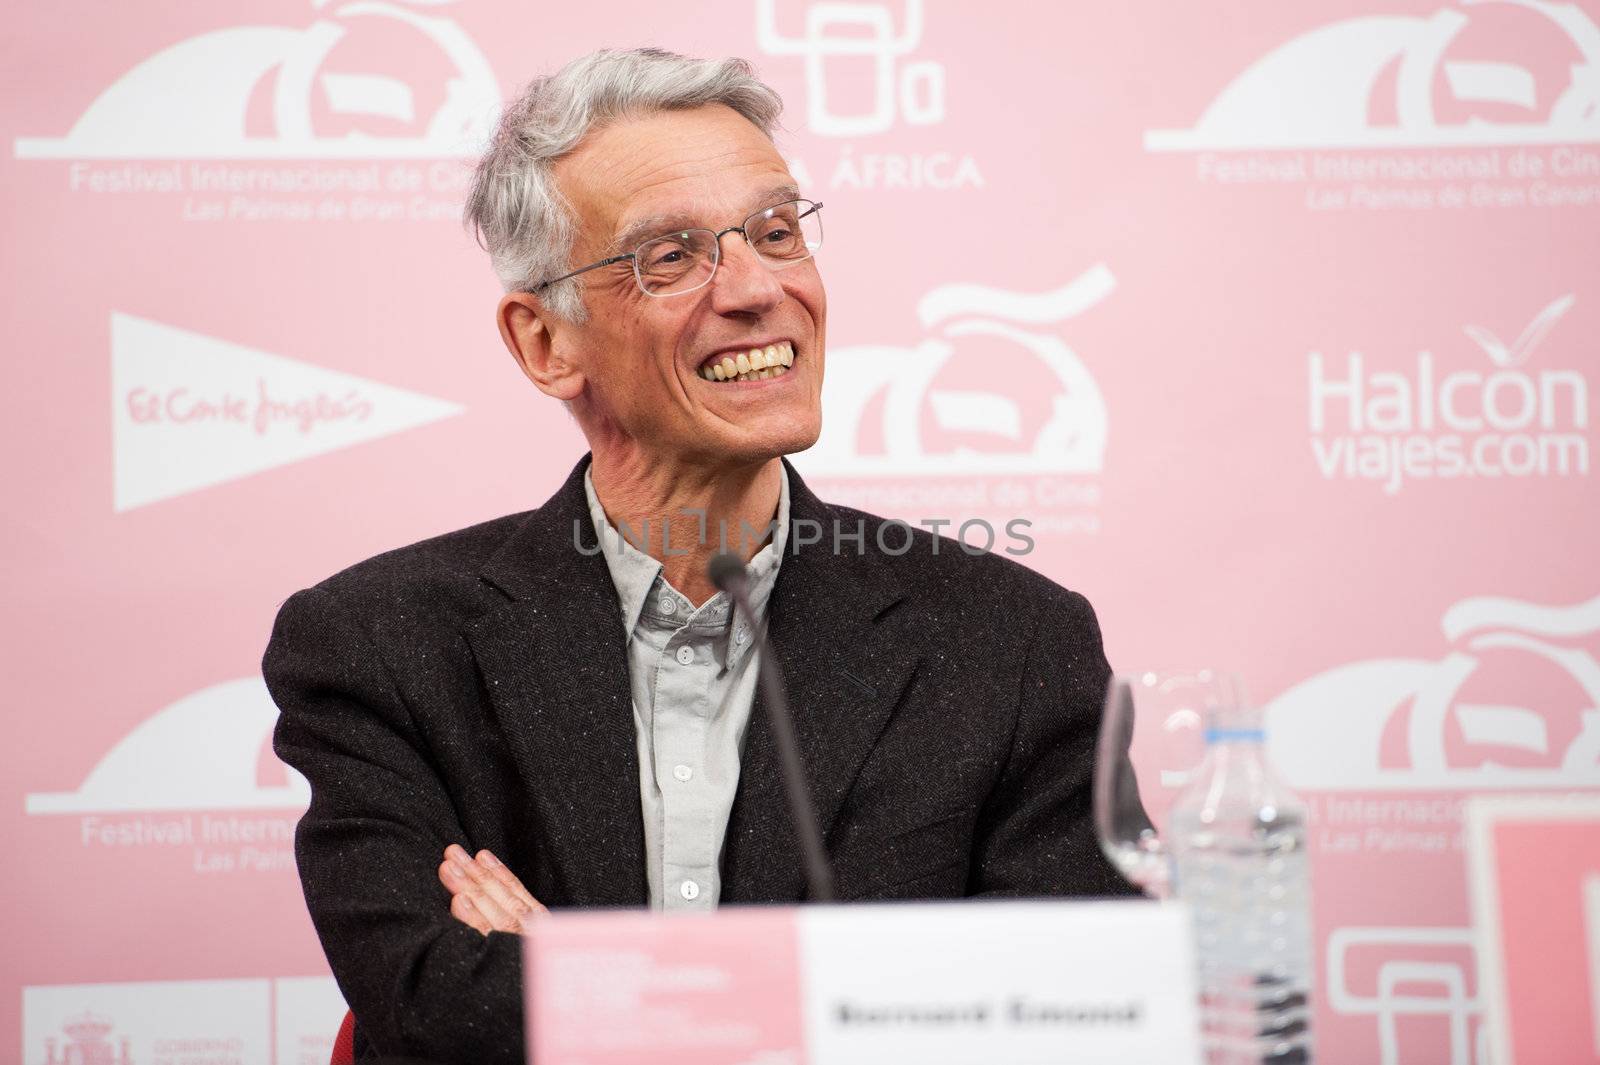 LAS PALMAS, SPAIN–MARCH 17: Bernard Emond, from Montreal, director of the trilogy on the three Christian virtues (2005), during LPA International Film Festival on March 17, 2012 in Las Palmas, Spain
